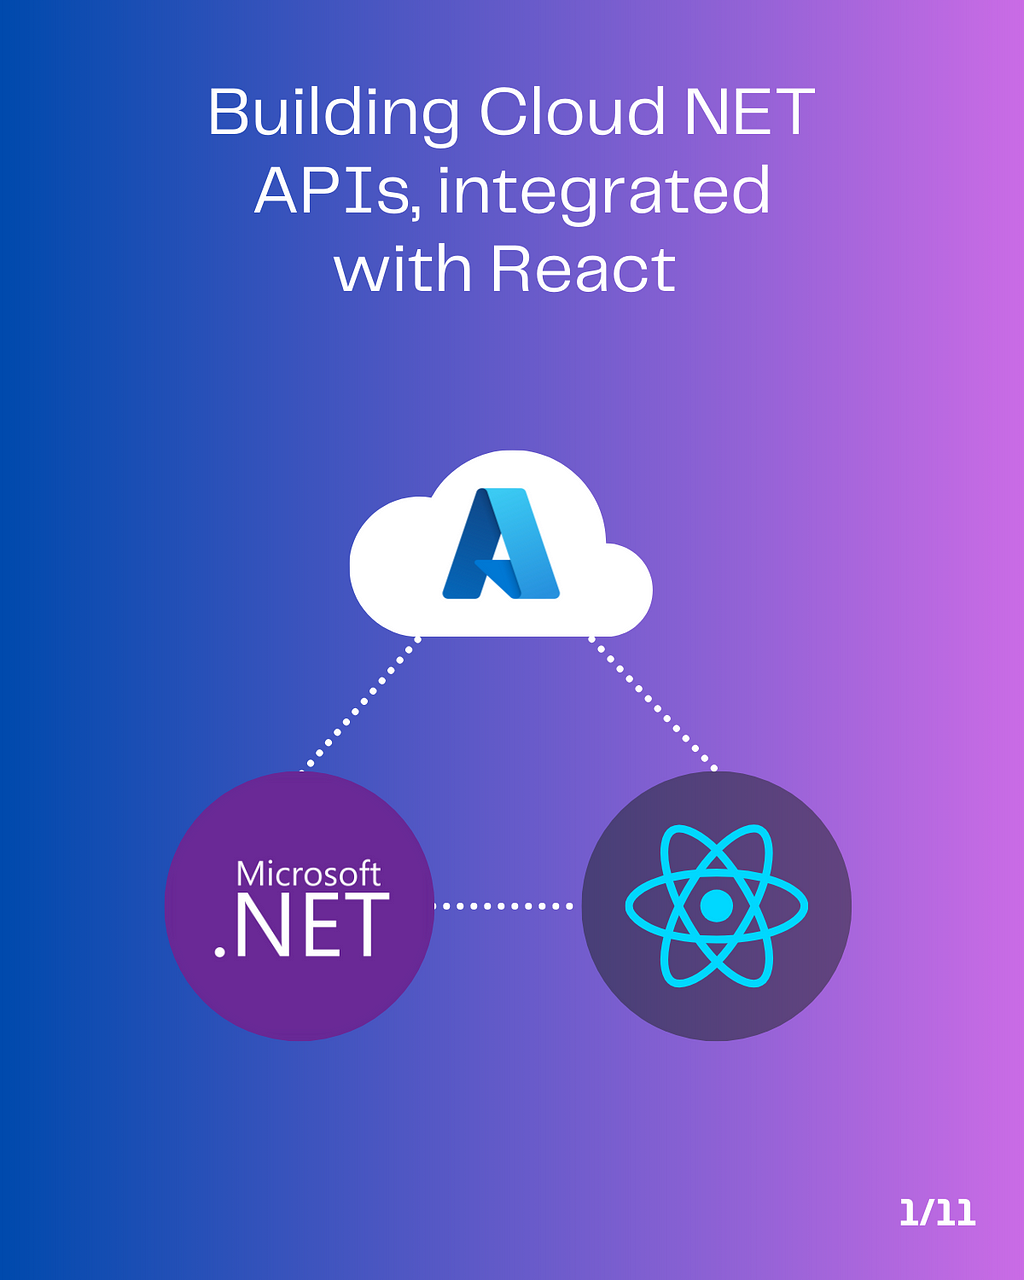 Building Cloud NET APIs, integrated with React using Azure and Axios